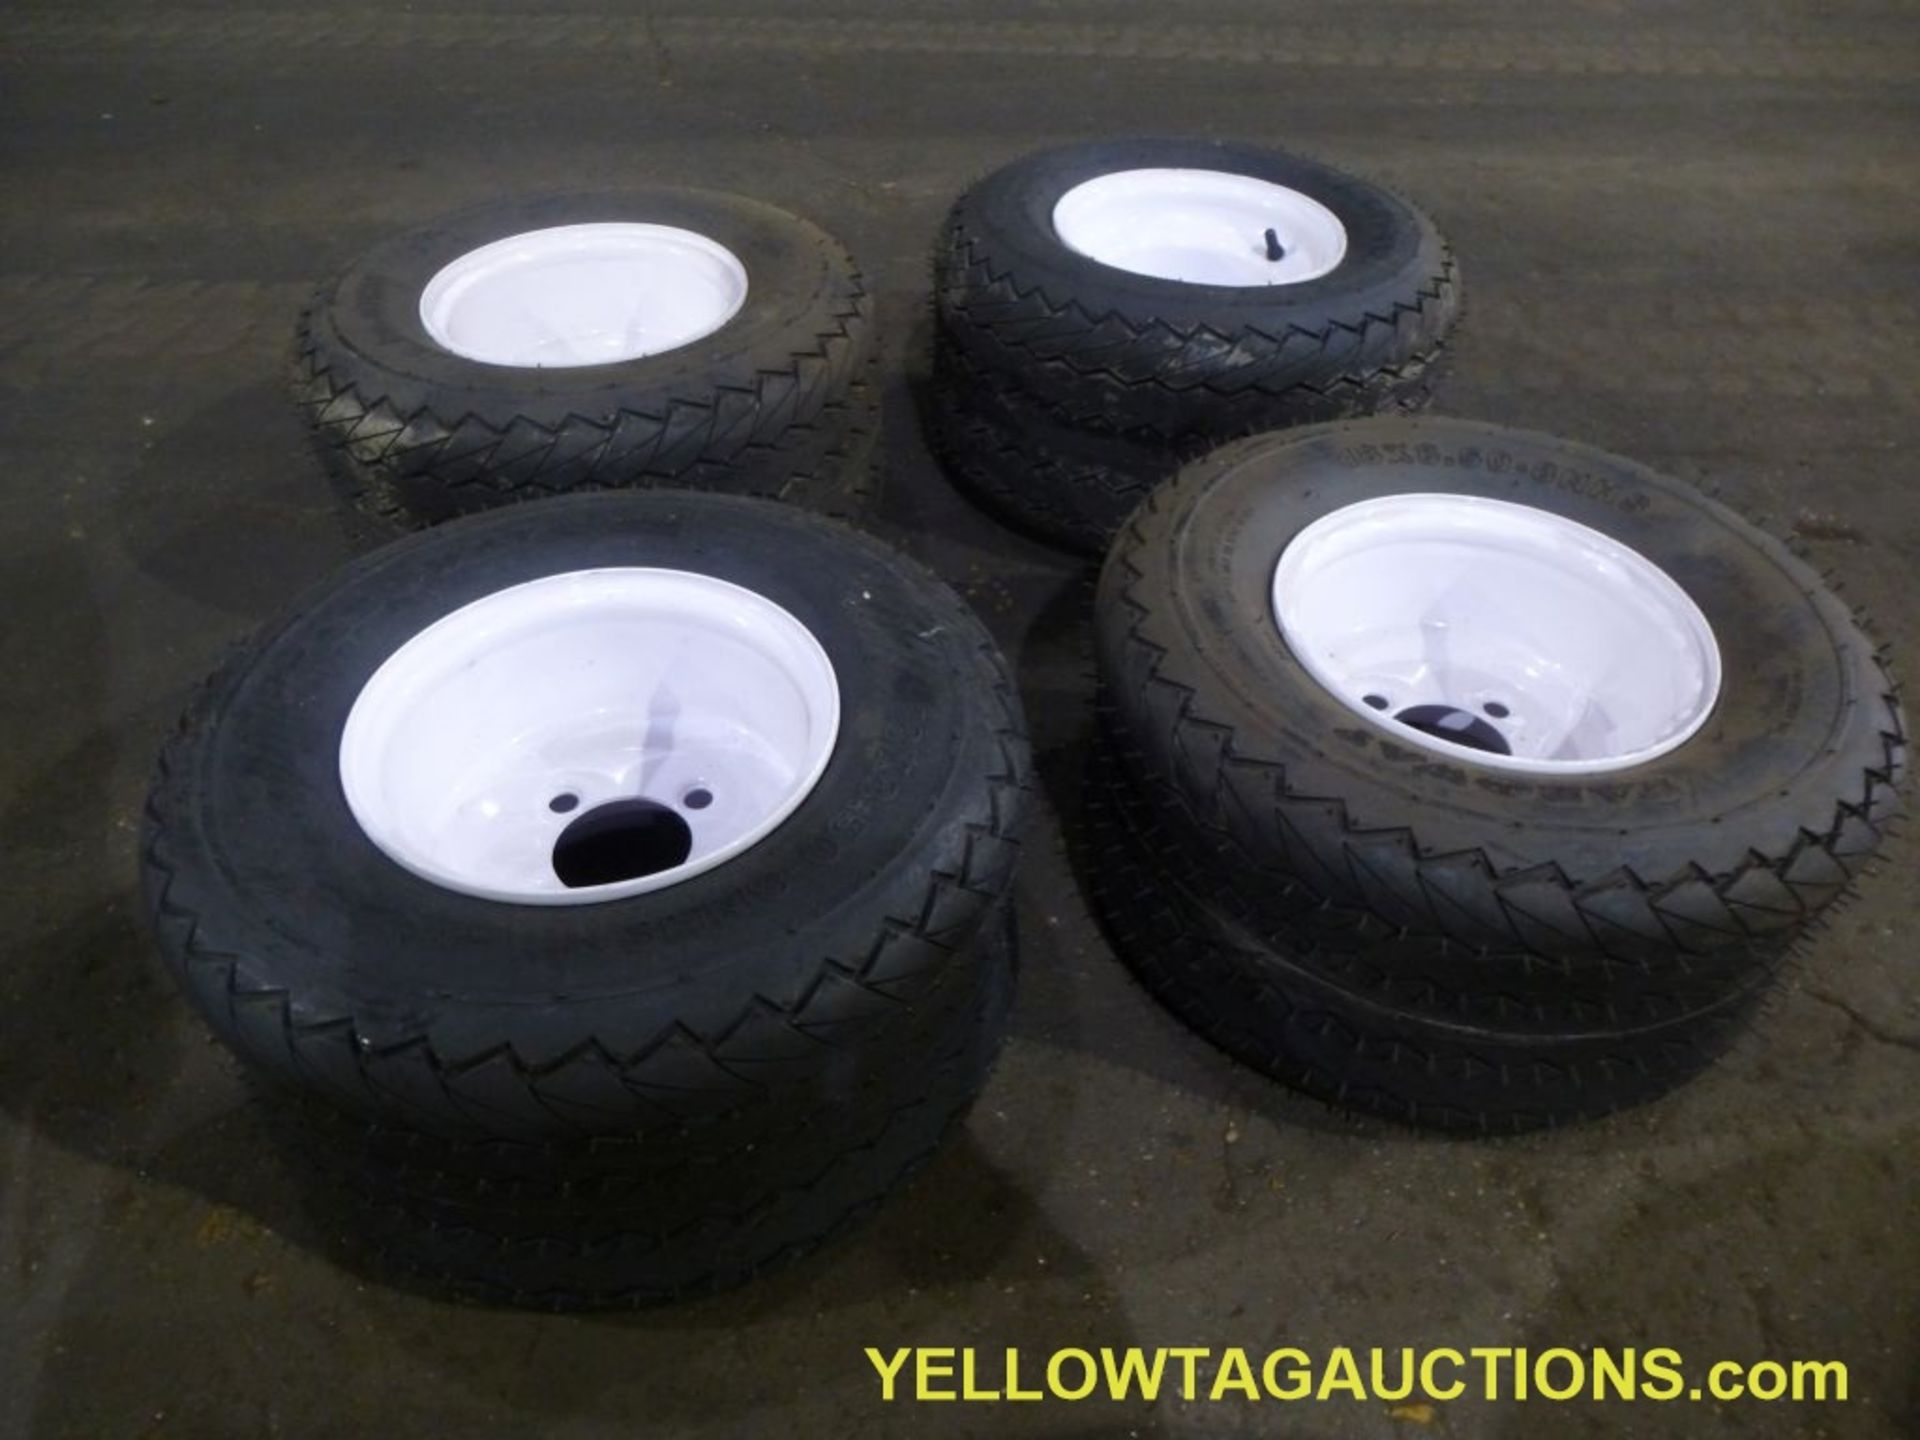 Lot of (12) FarWay 6-Ply Nylon Tires & Wheels|18 X 8.50 - 8NHS|Tag: 438 - Image 2 of 8